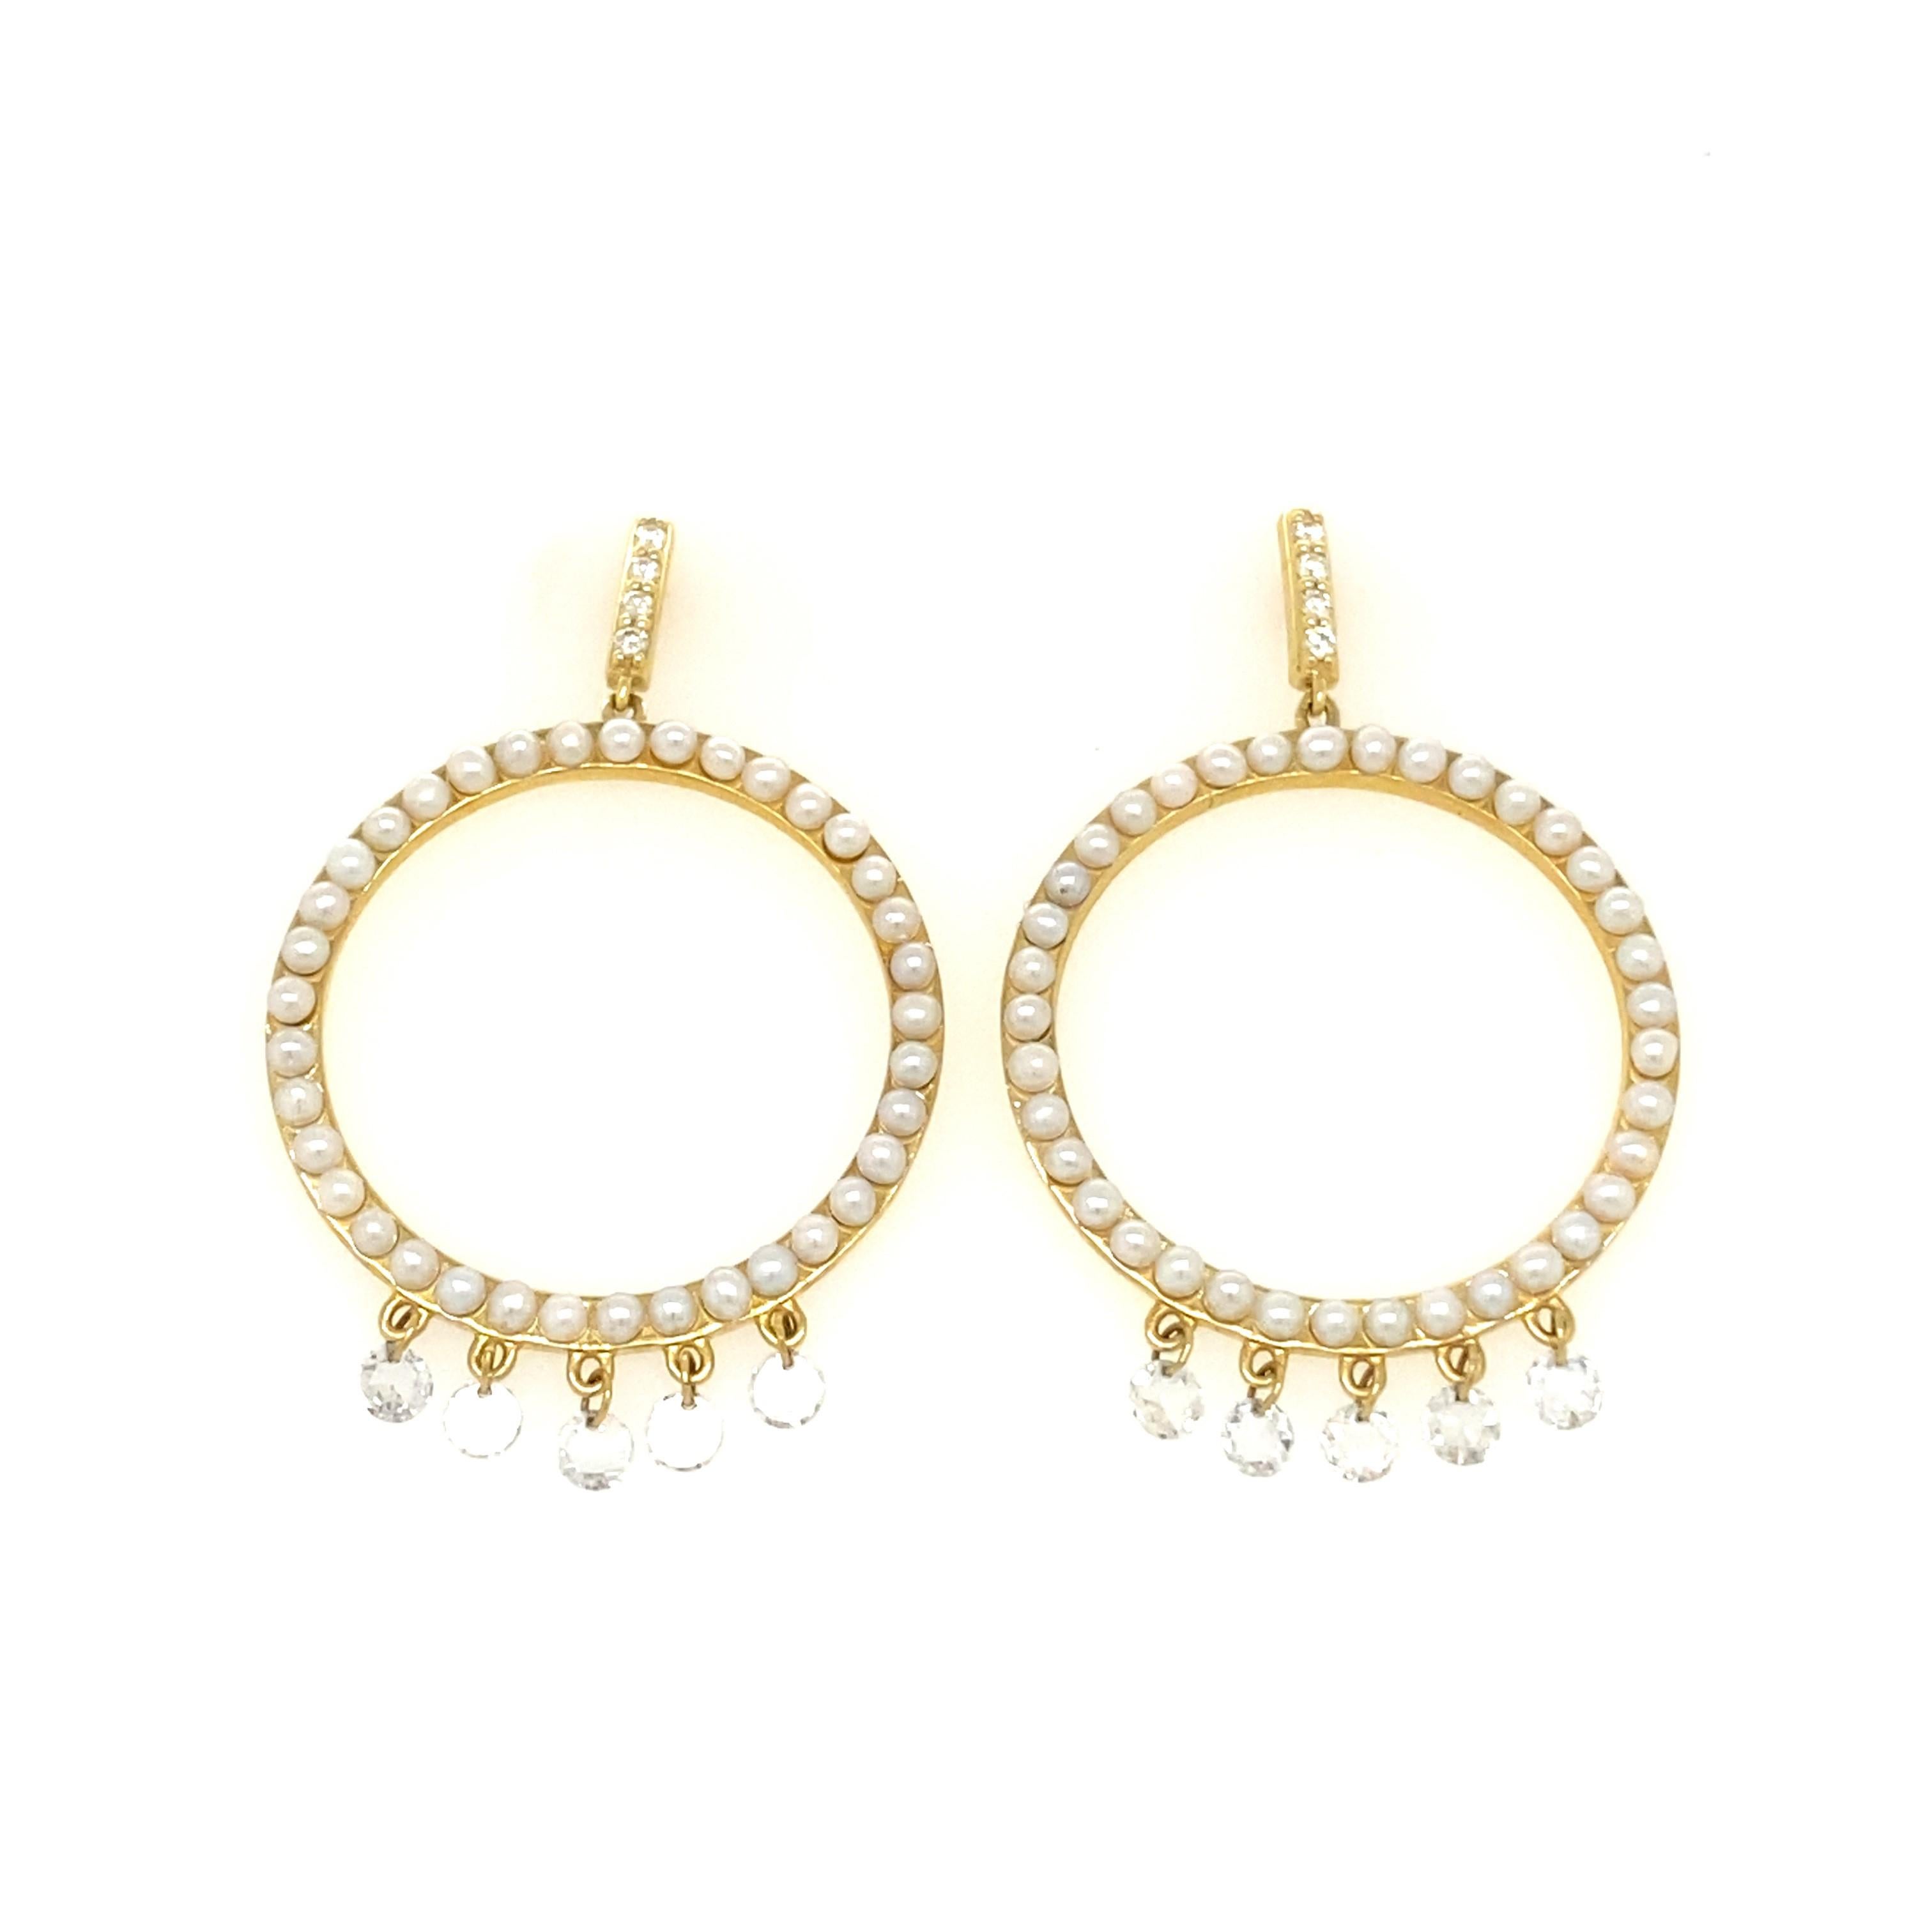 Sloane Street open circle chandelier earring is a playful pearl earring with five hanging micro-drilled rosecut diamonds in 18k yellow gold, creating movement and sparkle with every step.